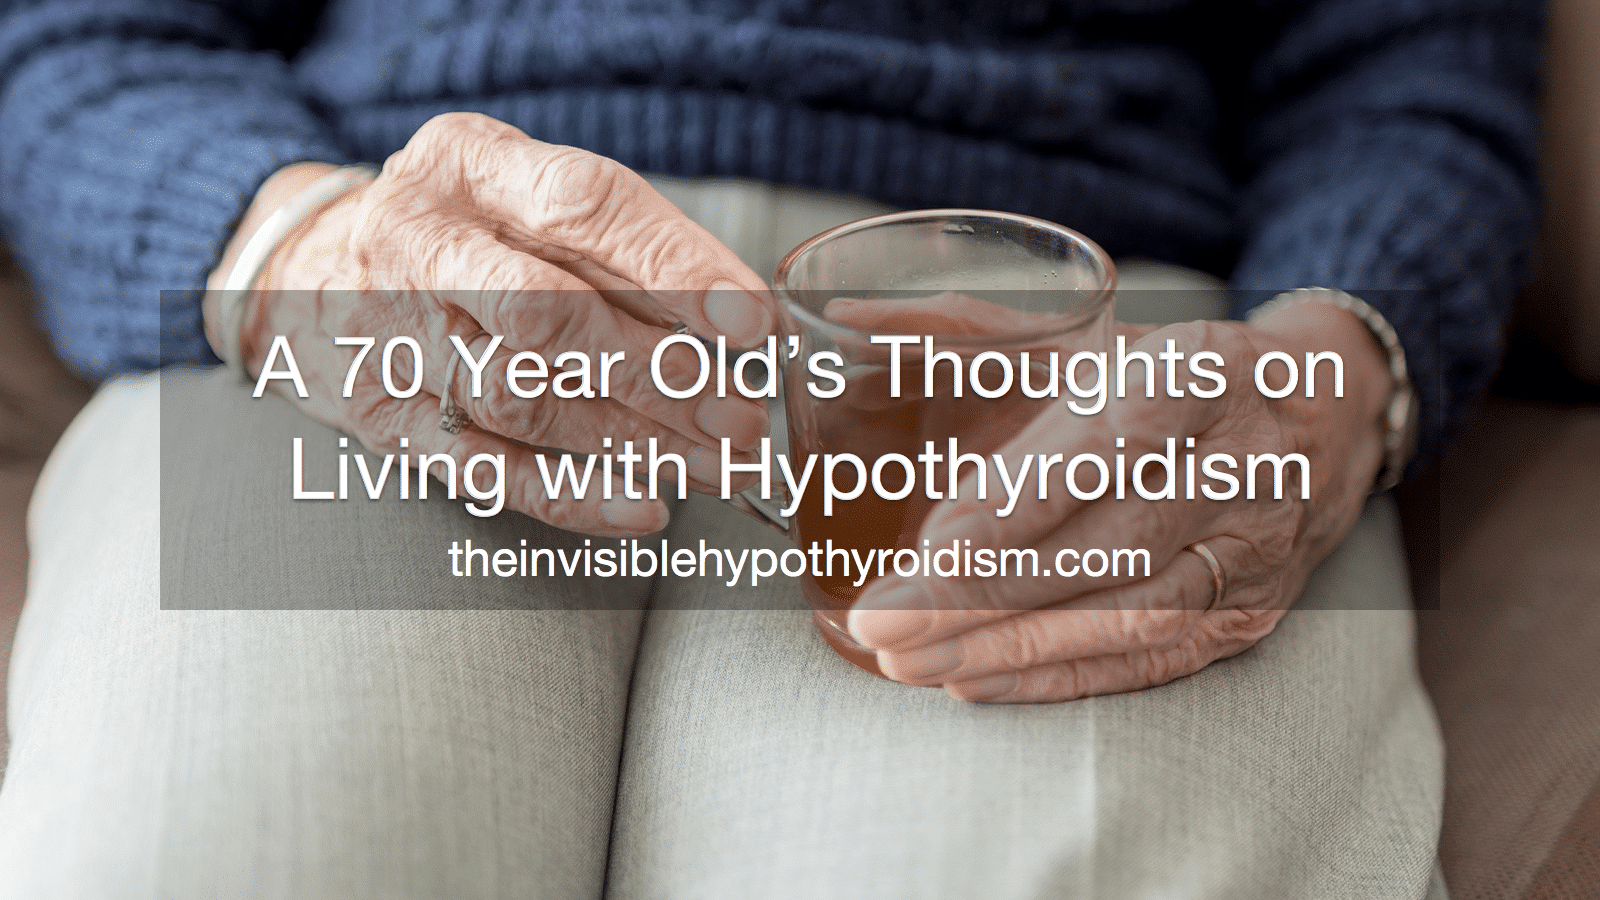 A 70 Year Old Thoughts on Living with Hypothyroidism